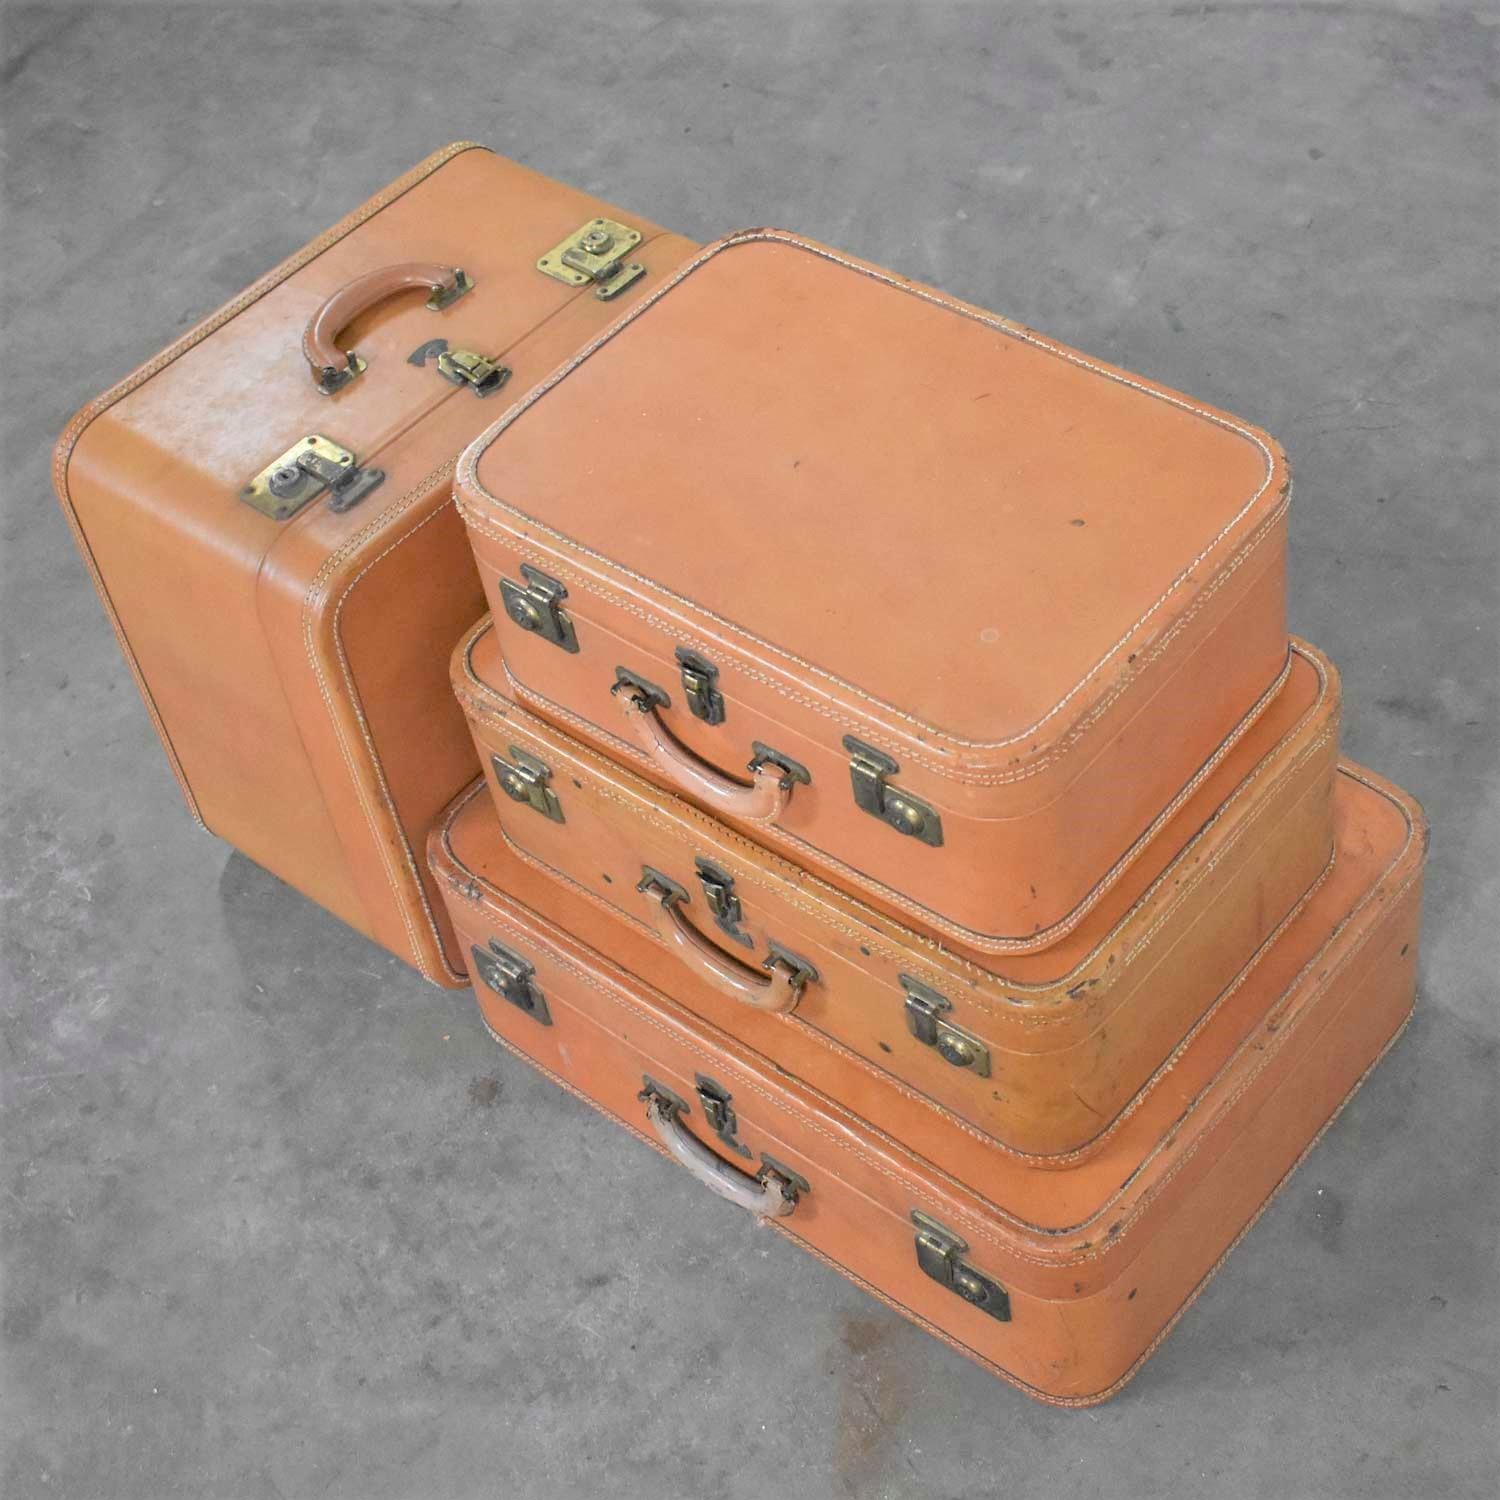 4 Stratosphere Rappaport Leather Suitcases Luggage as Side Tables End Tables 2